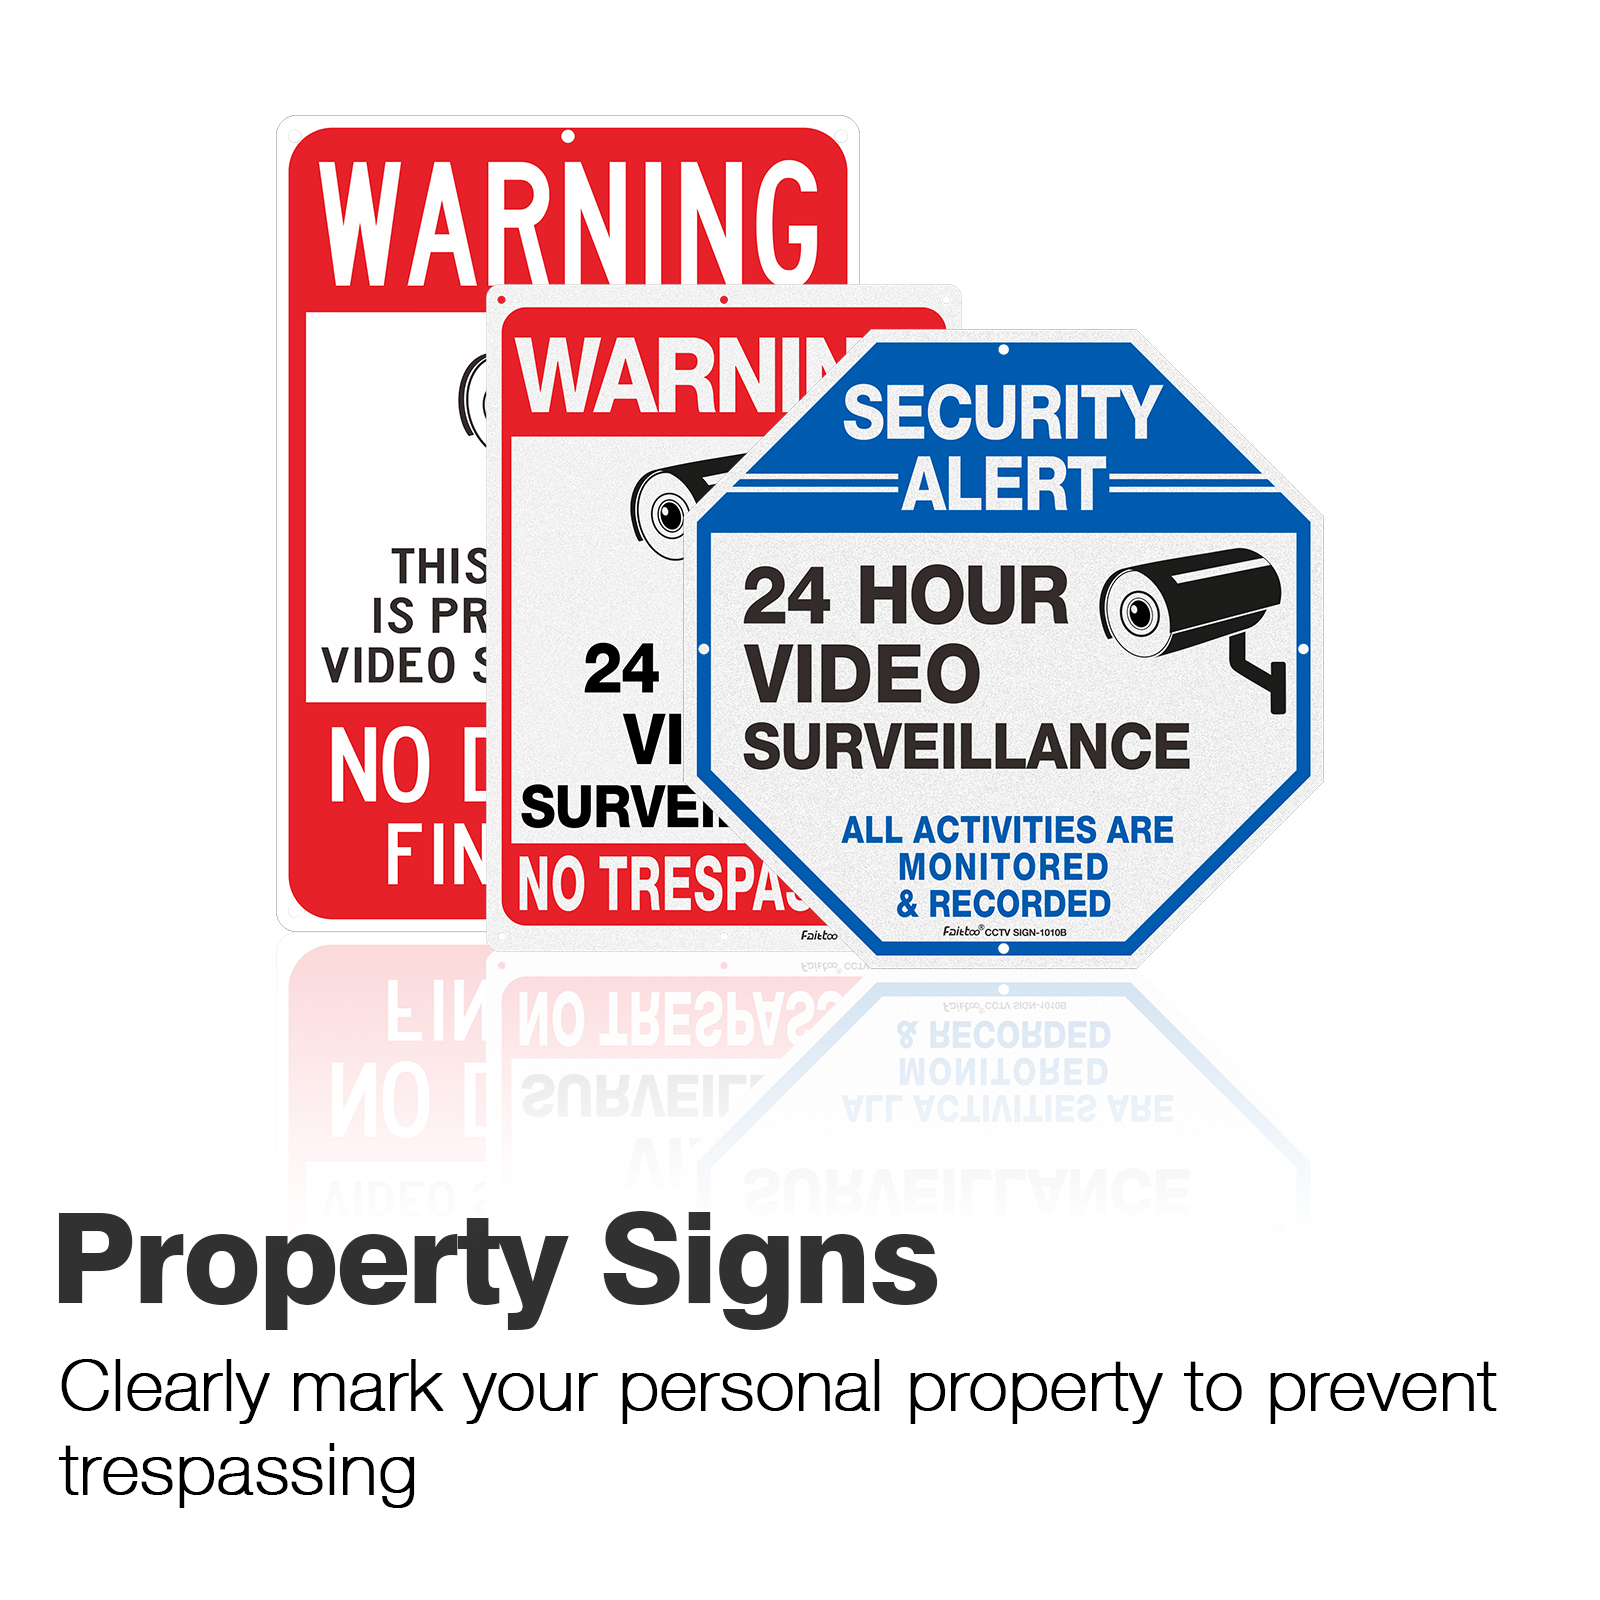 Faittoo 10 inches Video Surveillance Signs with 10 x 7 inches Private Property No Trespassing Signs，0.40 Aluminum Reflective Metal Signs. Indoor or Outdoor Use for Home Business